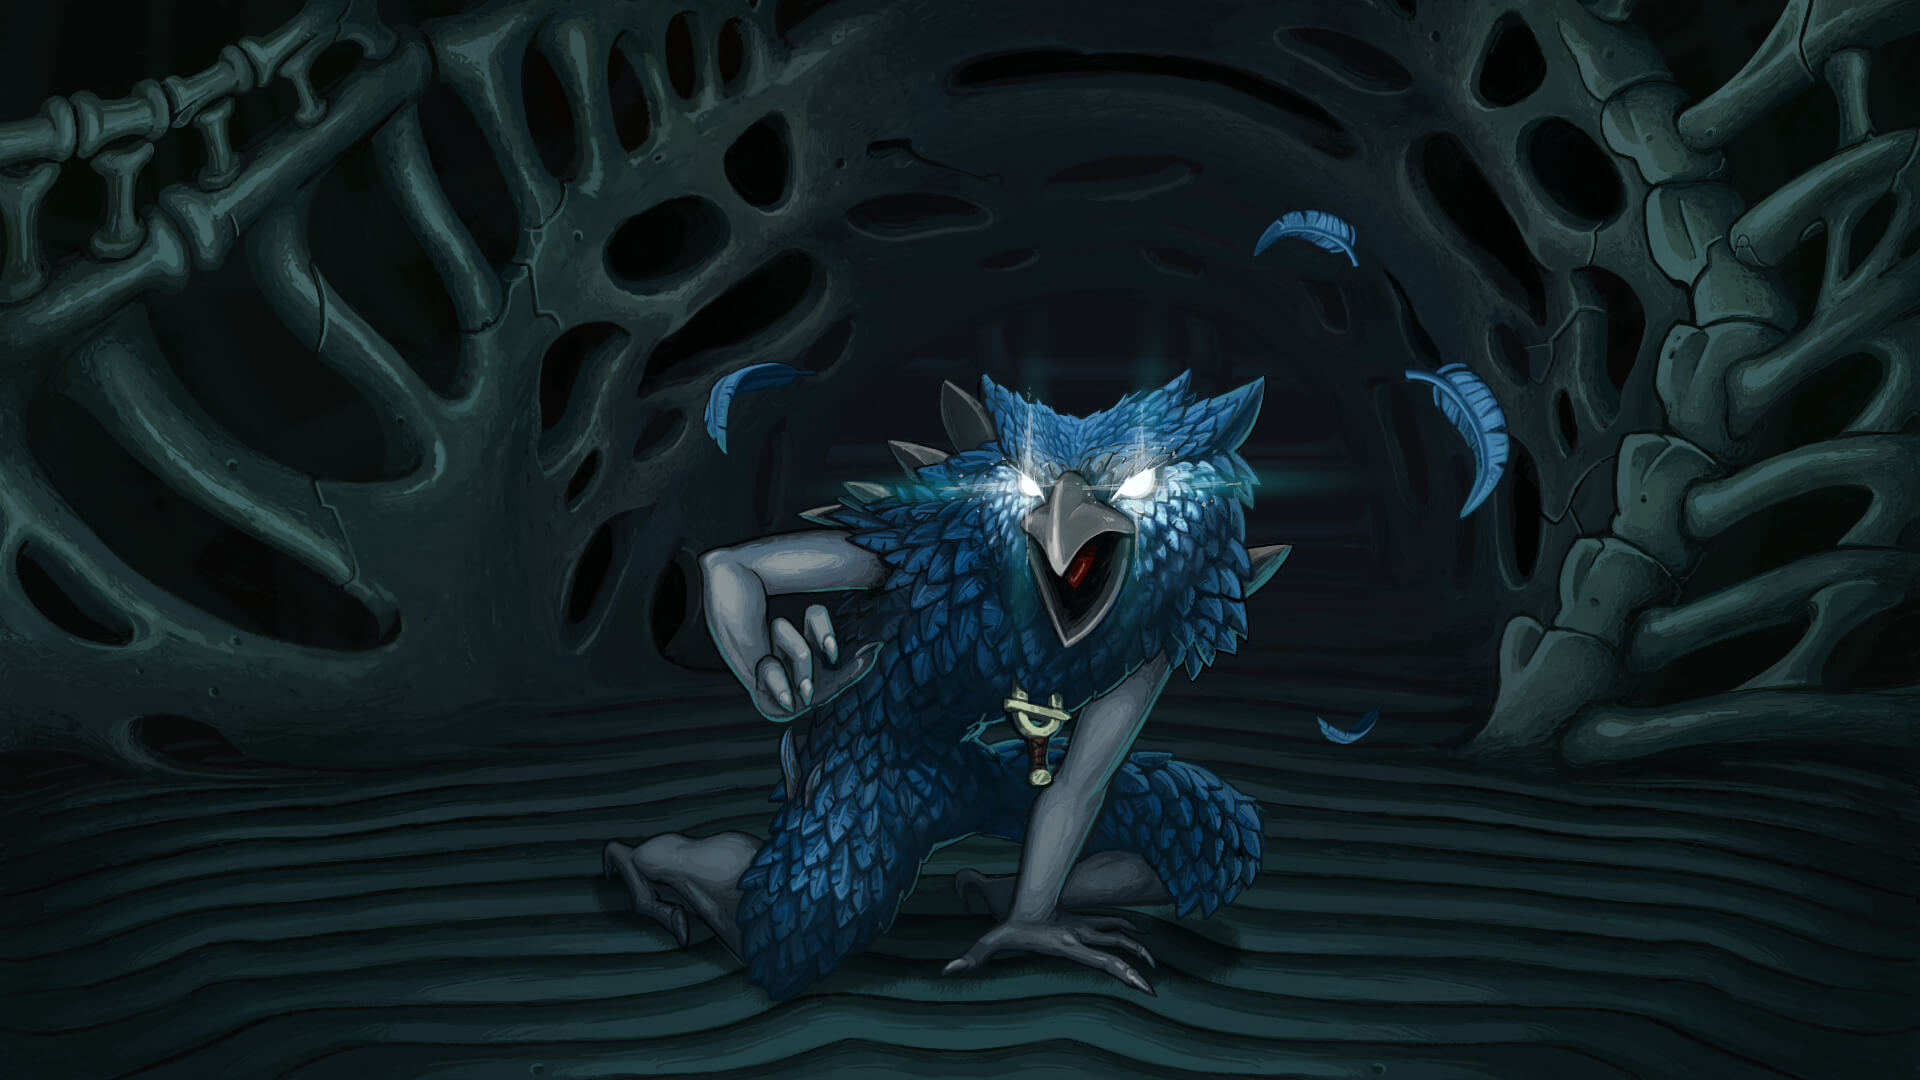 HD desktop wallpaper featuring a menacing blue creature from the game Slay the Spire, set against a dark, bone-themed background.